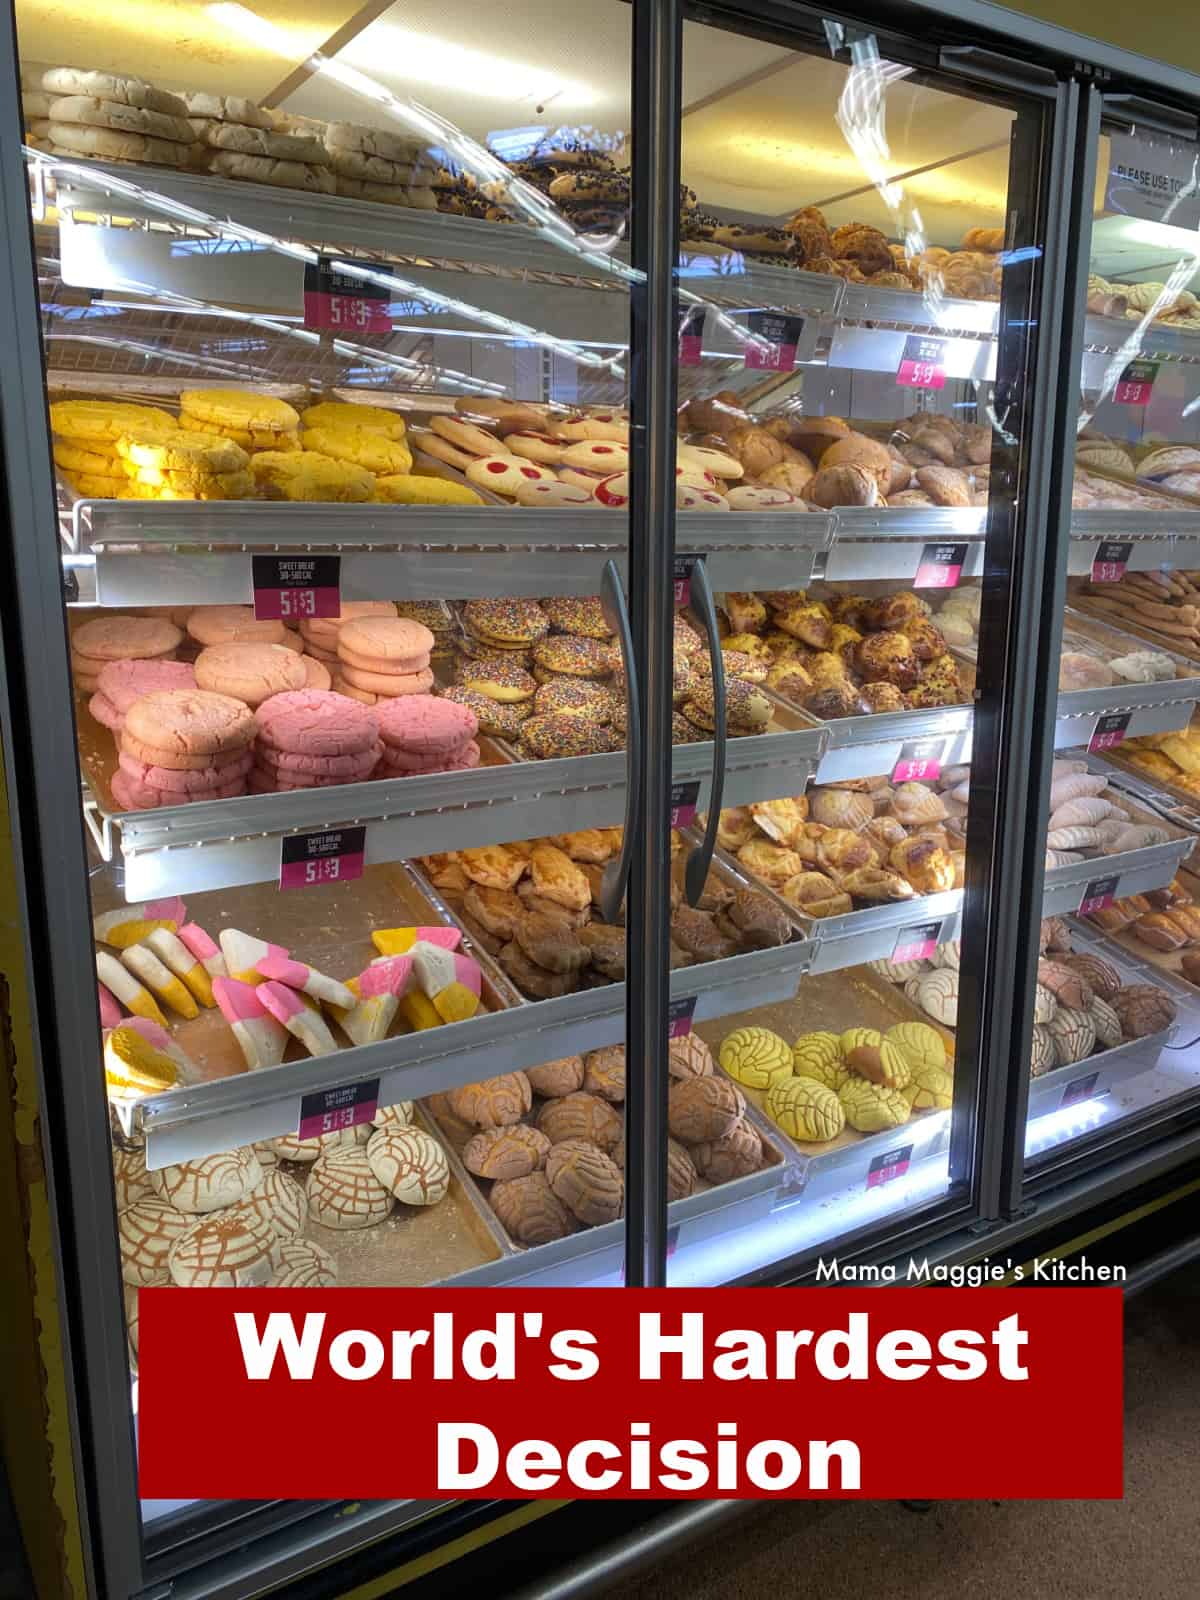 A glass case filled with pan dulce.